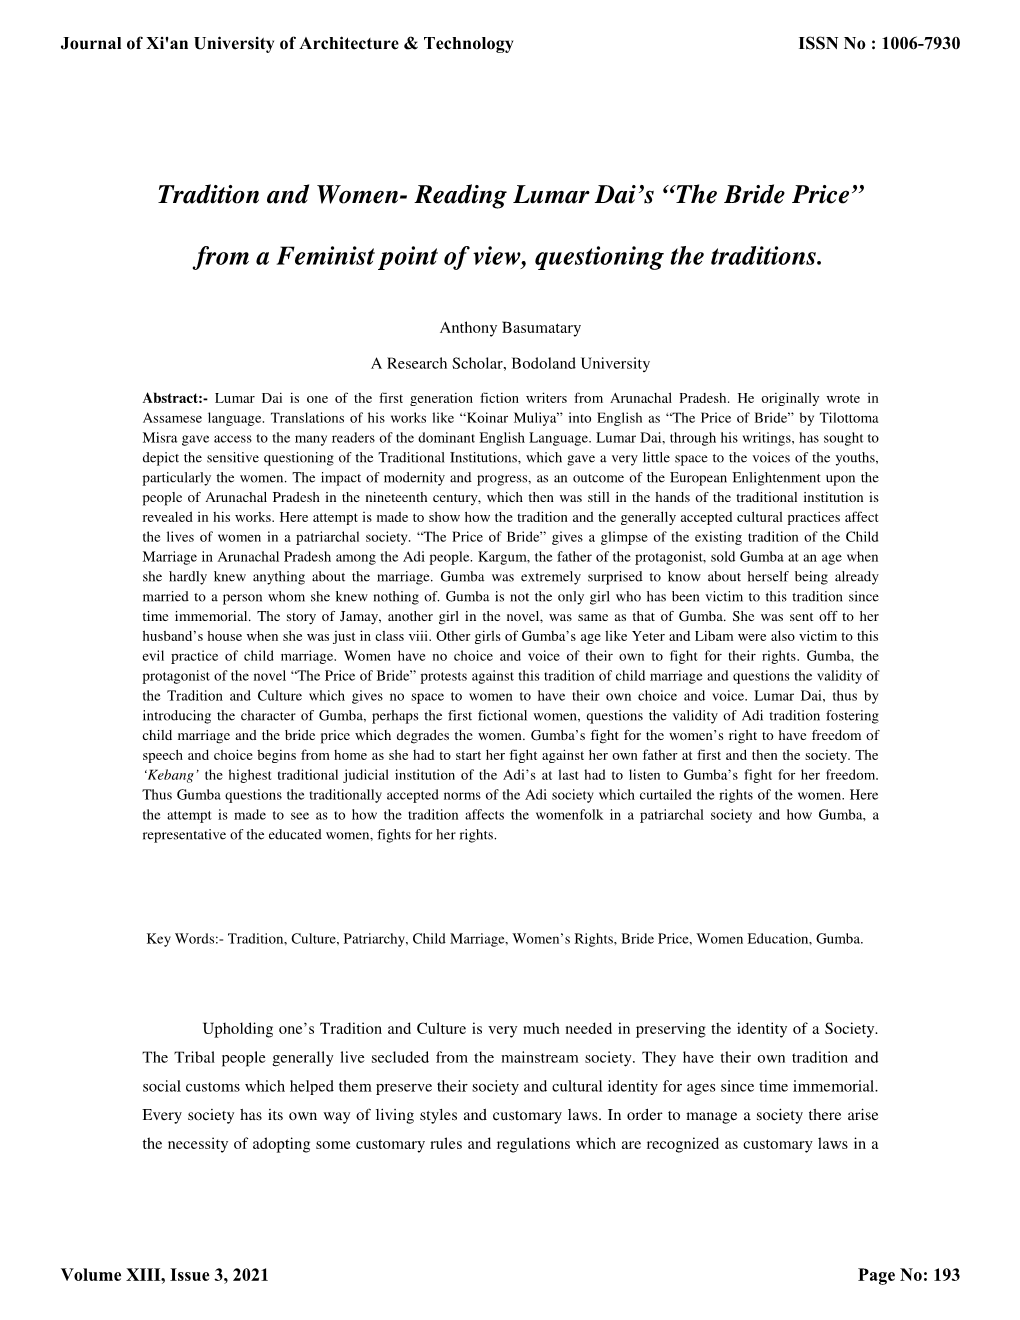 Tradition and Women- Reading Lumar Dai's “The Bride Price” from a Feminist Point of View, Questioning the Traditions